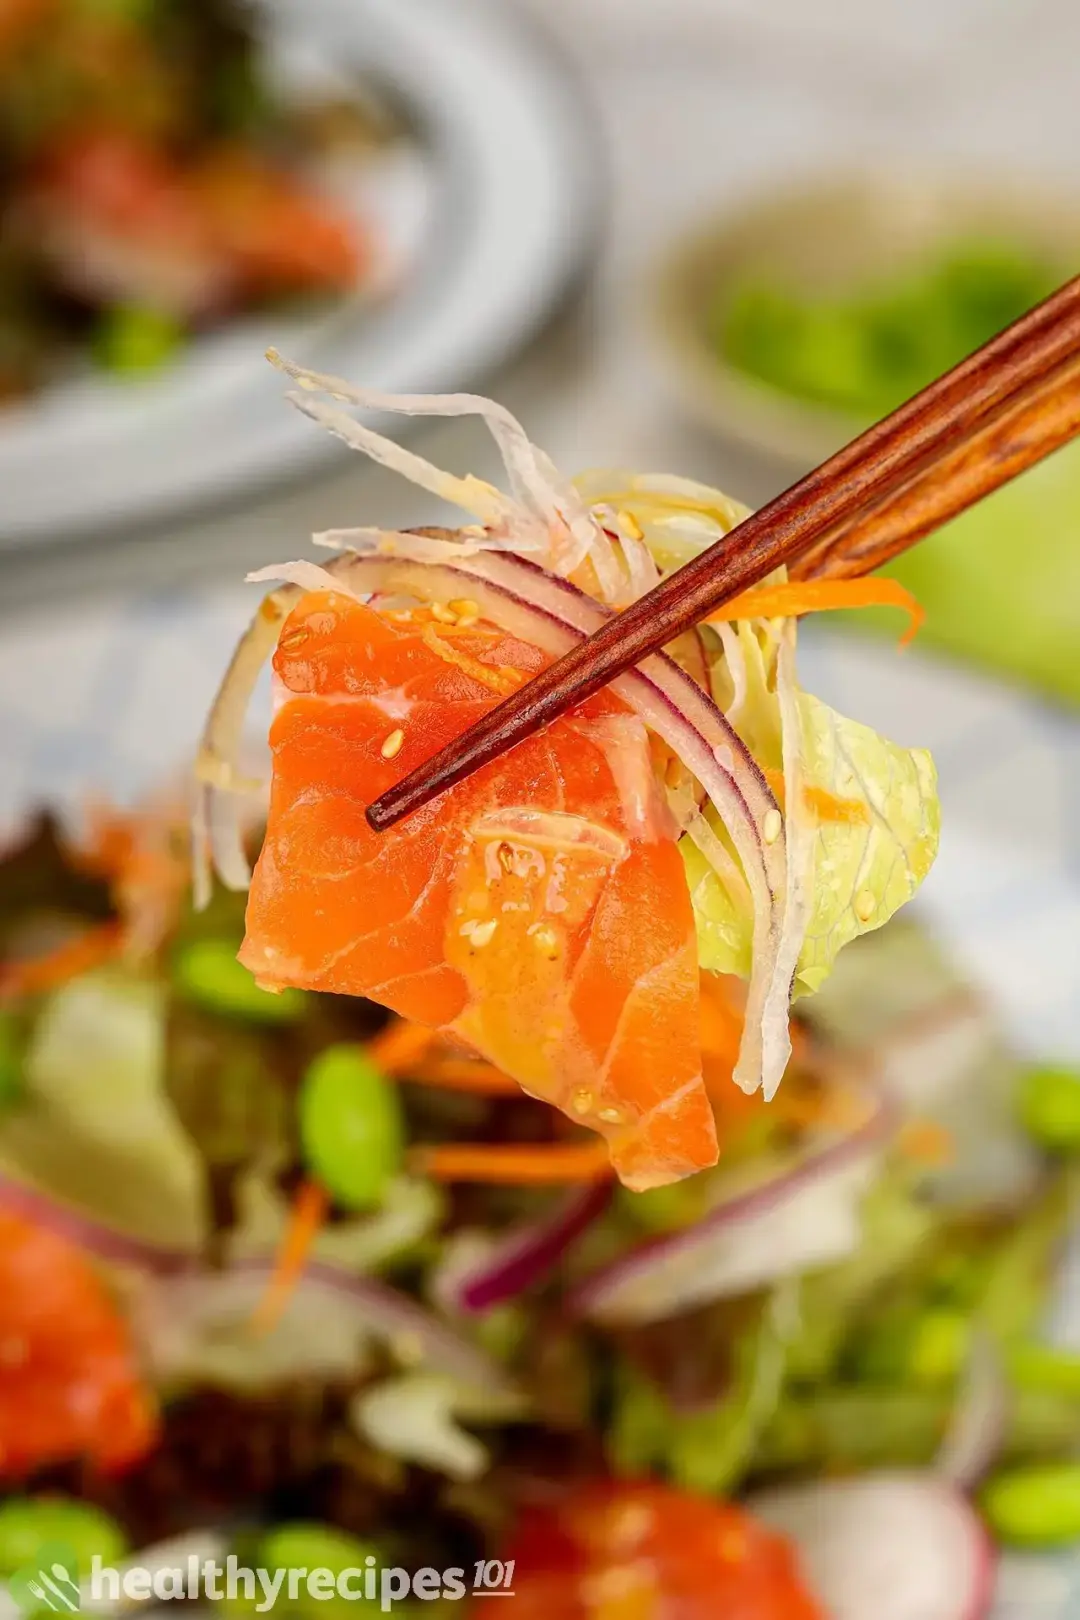 A close-up shot of a bite of Japanese salmon salad with wooden chopsticks